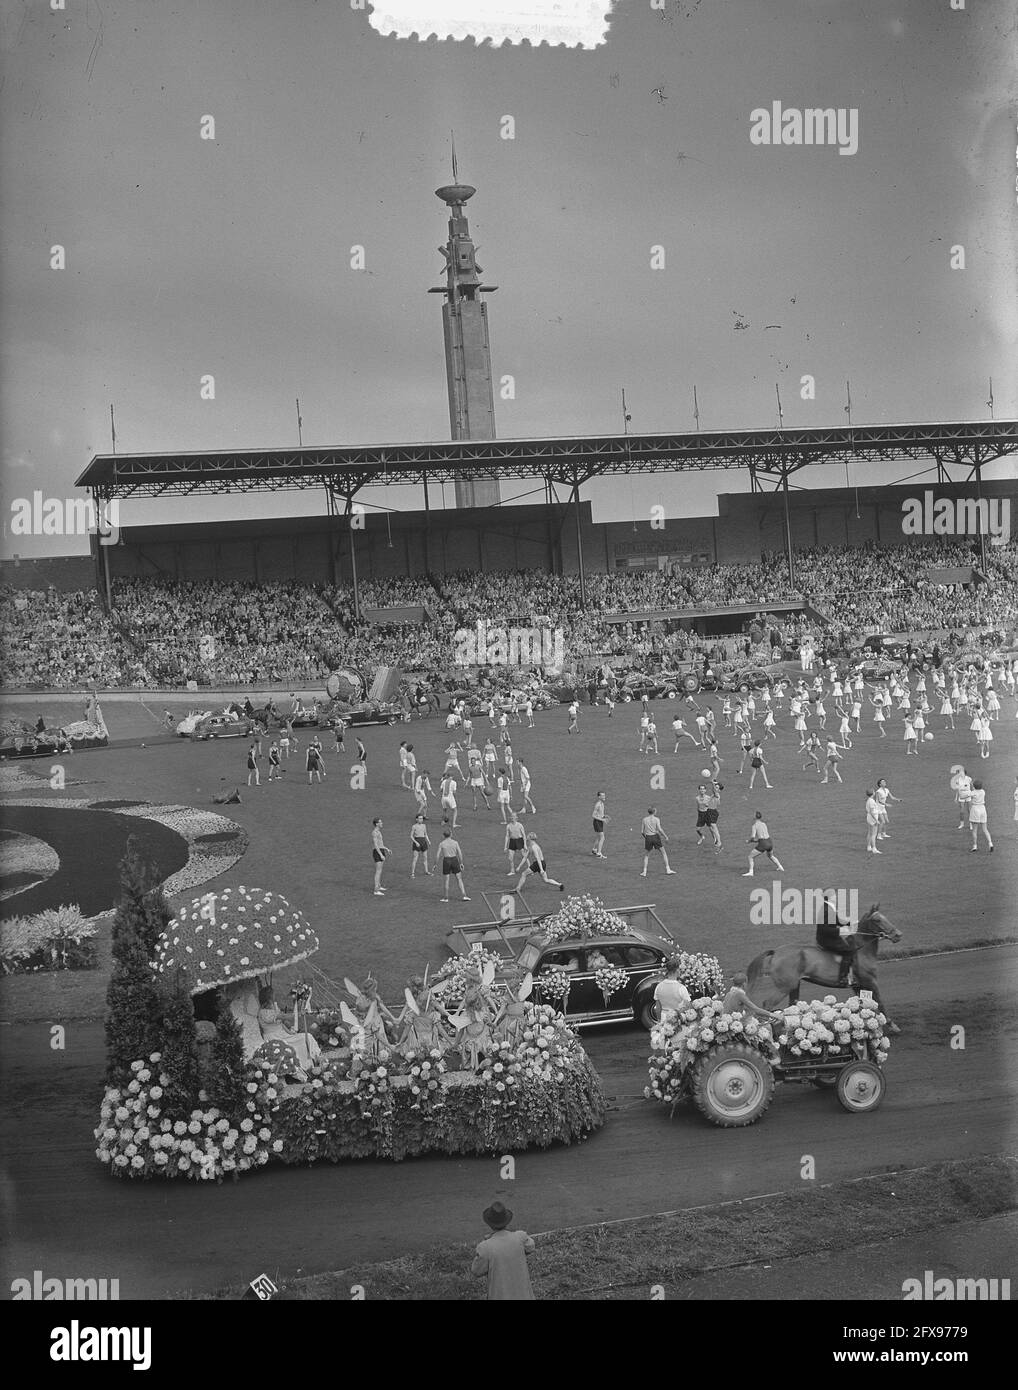 Bloemencorso Stadion Amsterdam, 6 September 1952, parades, stadiums, The Netherlands, 20th century press agency photo, news to remember, documentary, historic photography 1945-1990, visual stories, human history of the Twentieth Century, capturing moments in time Stock Photo